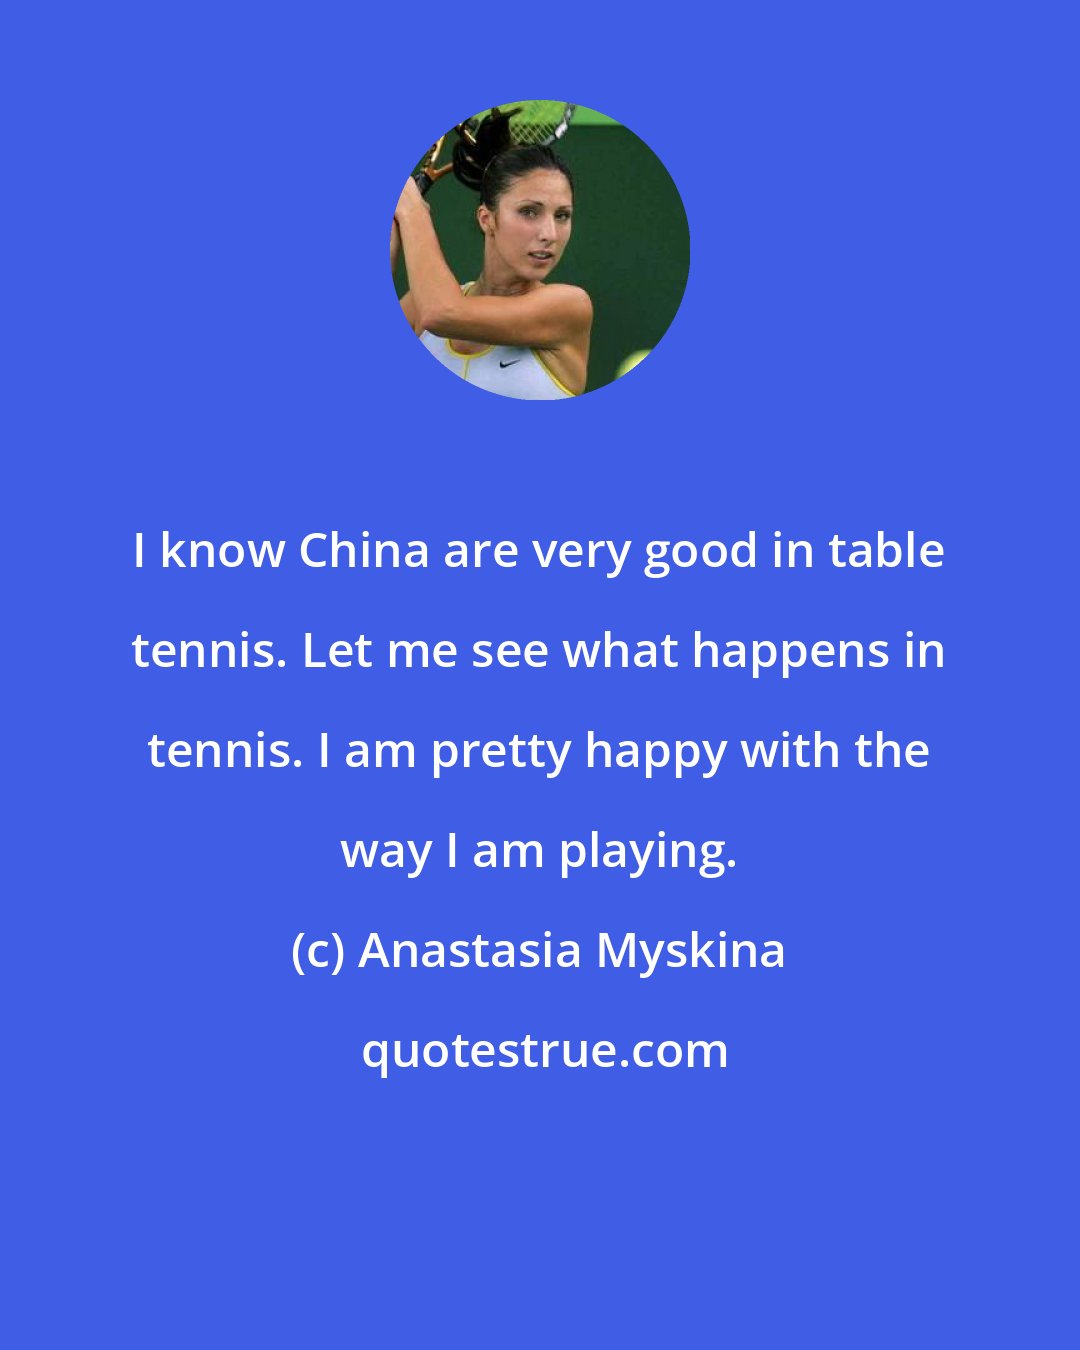 Anastasia Myskina: I know China are very good in table tennis. Let me see what happens in tennis. I am pretty happy with the way I am playing.